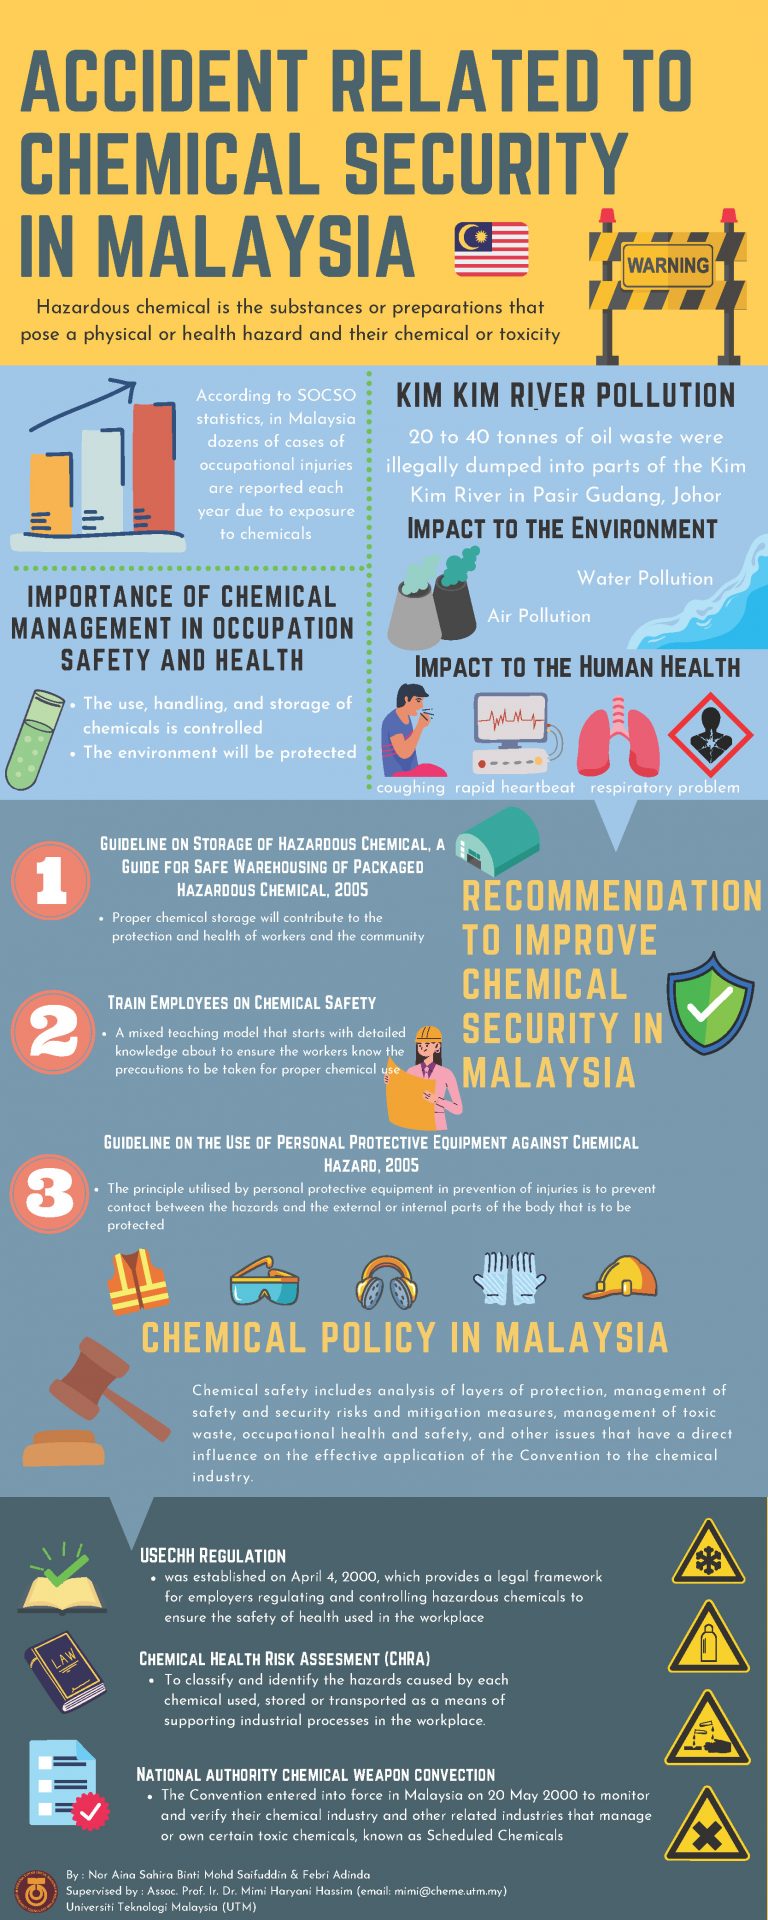 ACCIDENTS RELATED TO CHEMICAL SECURITY IN MALAYSIA